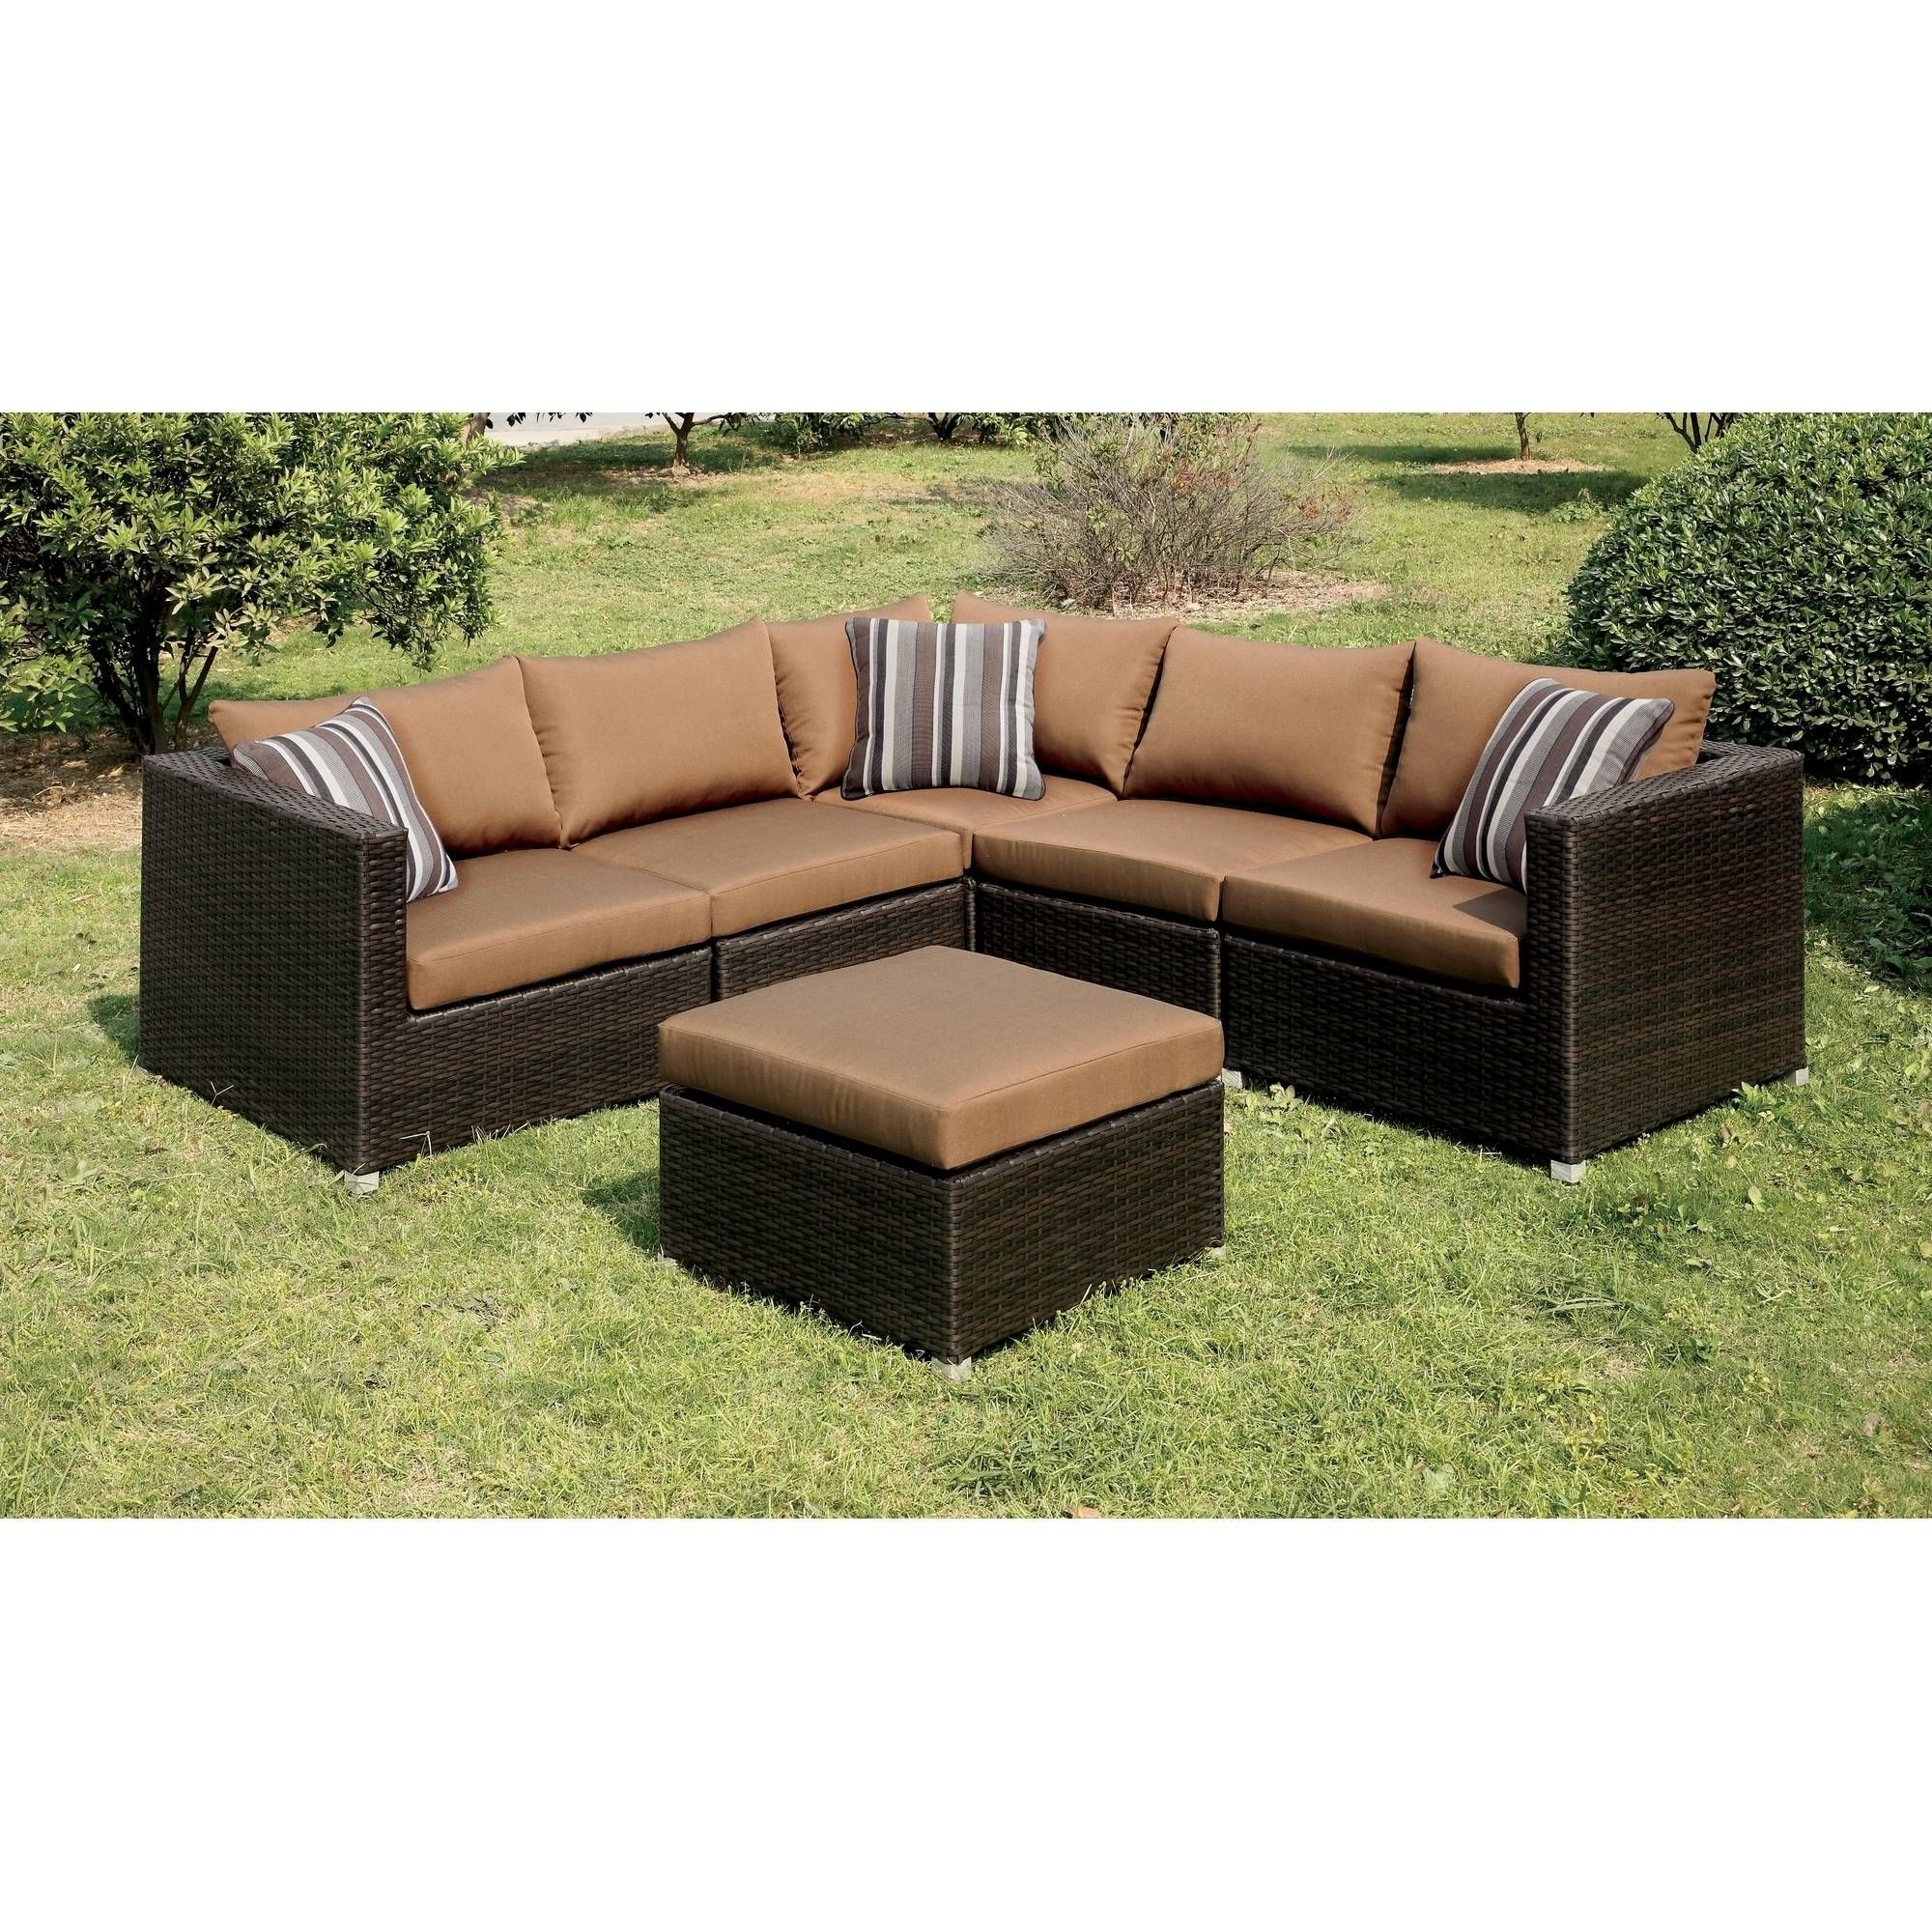 Furniture Of America Baca Patio Sectional And Ottoman Set, Ivory In Most Up To Date Baca Patio Sofas With Cushions (View 19 of 25)